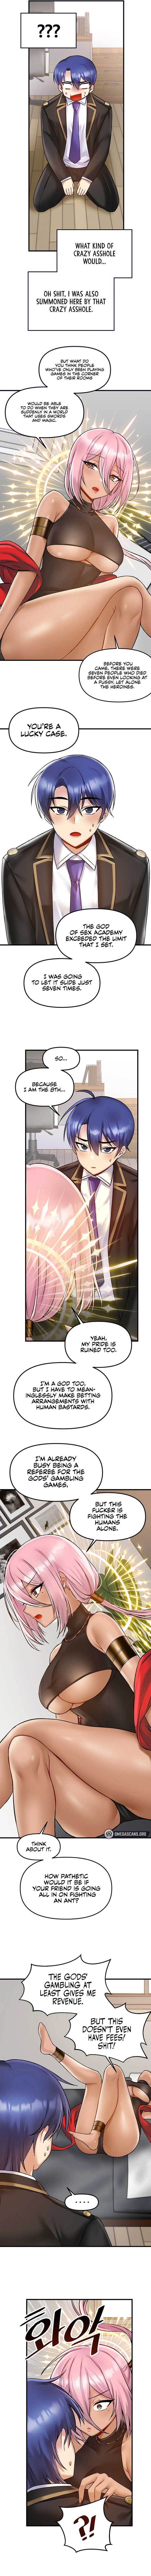 trapped-in-the-academys-eroge-chap-33-2